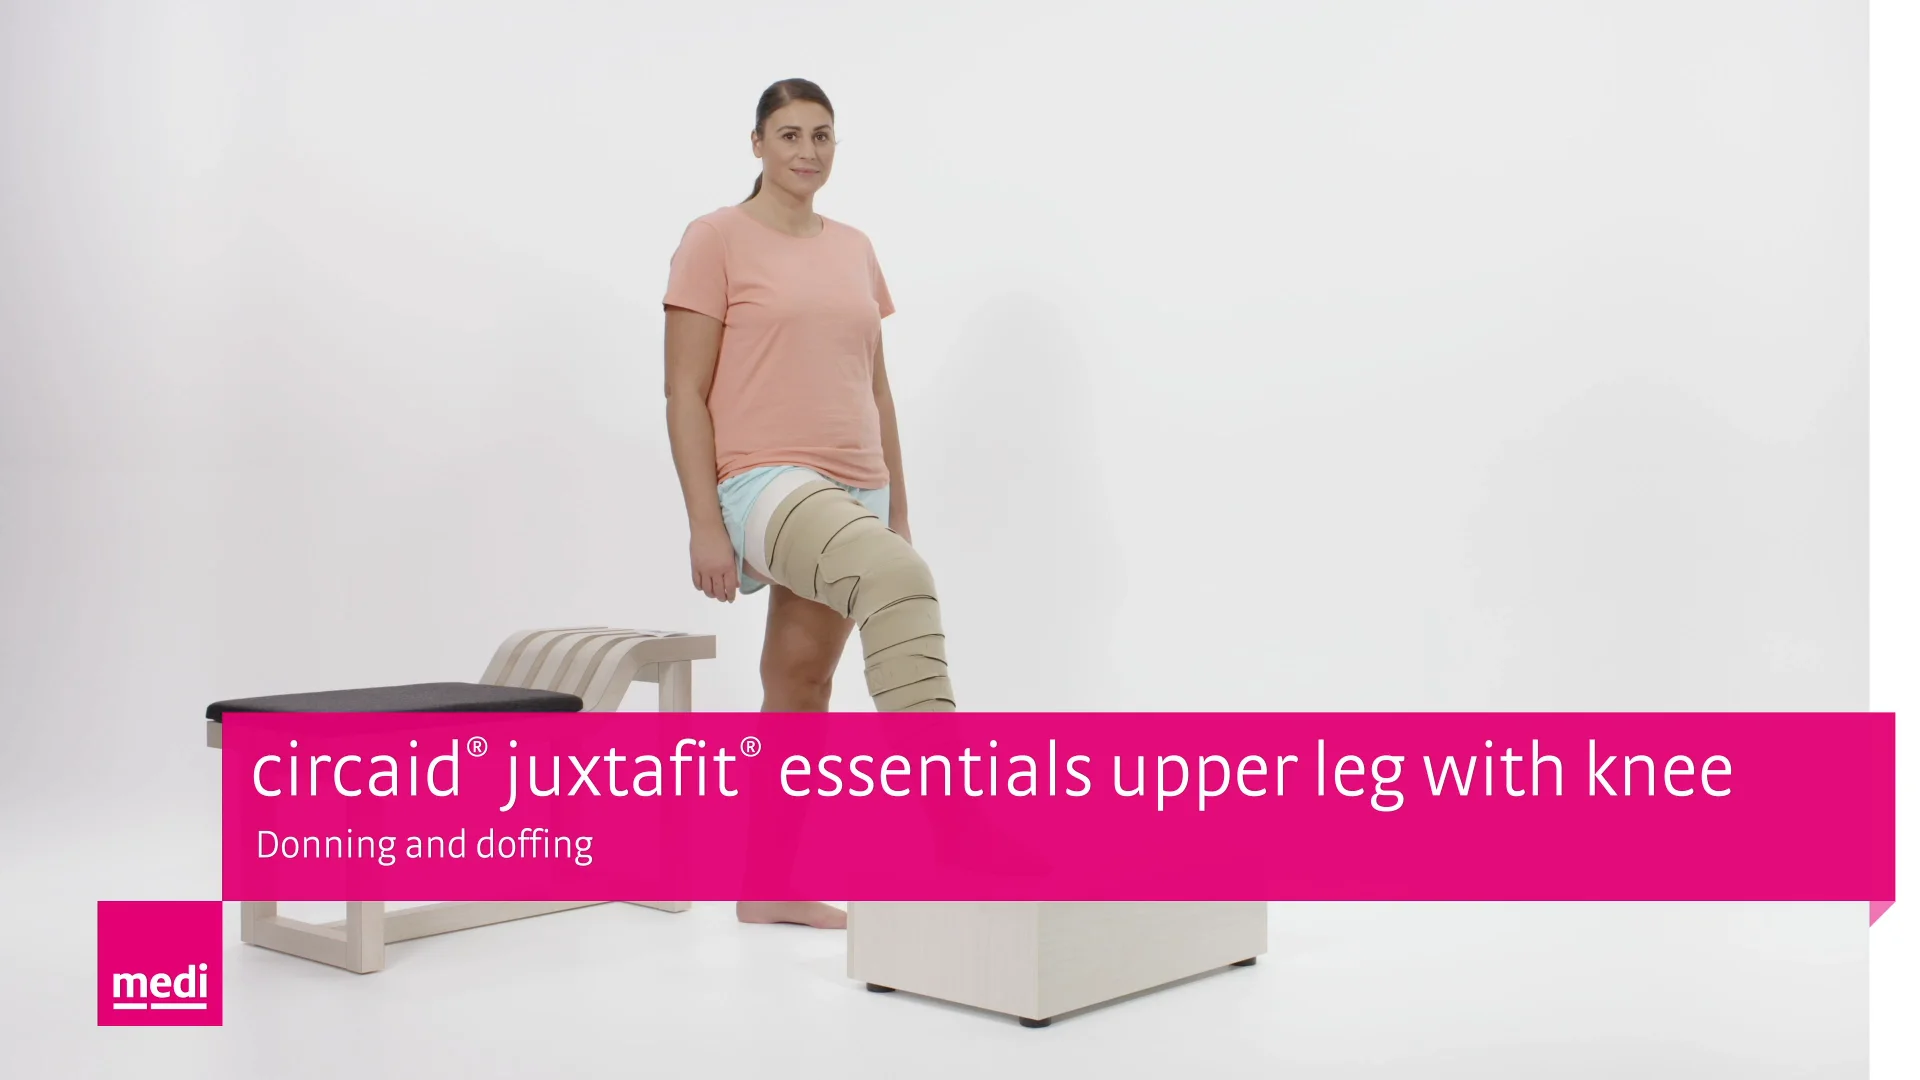 circaid® juxtafit® essentials upper leg with knee – Donning and doffing on  Vimeo